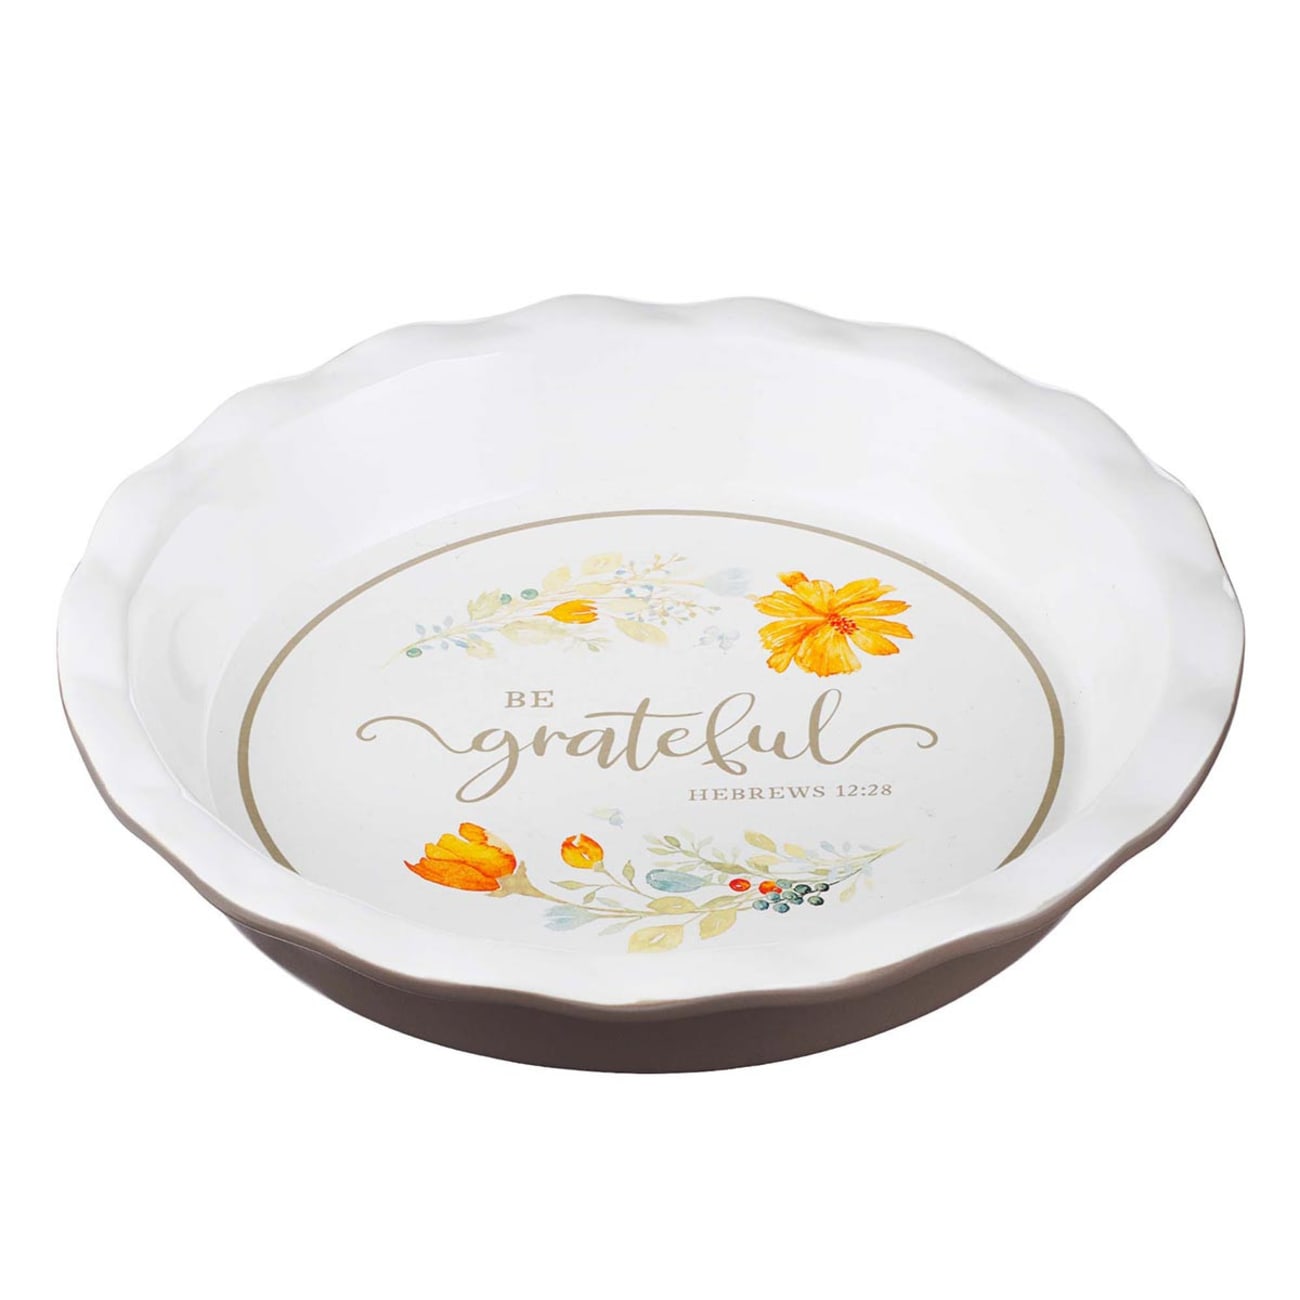 Ceramic Pie Plate- Be Grateful, White With Scalloped Edge and Flowers (Grateful Collection) Homeware